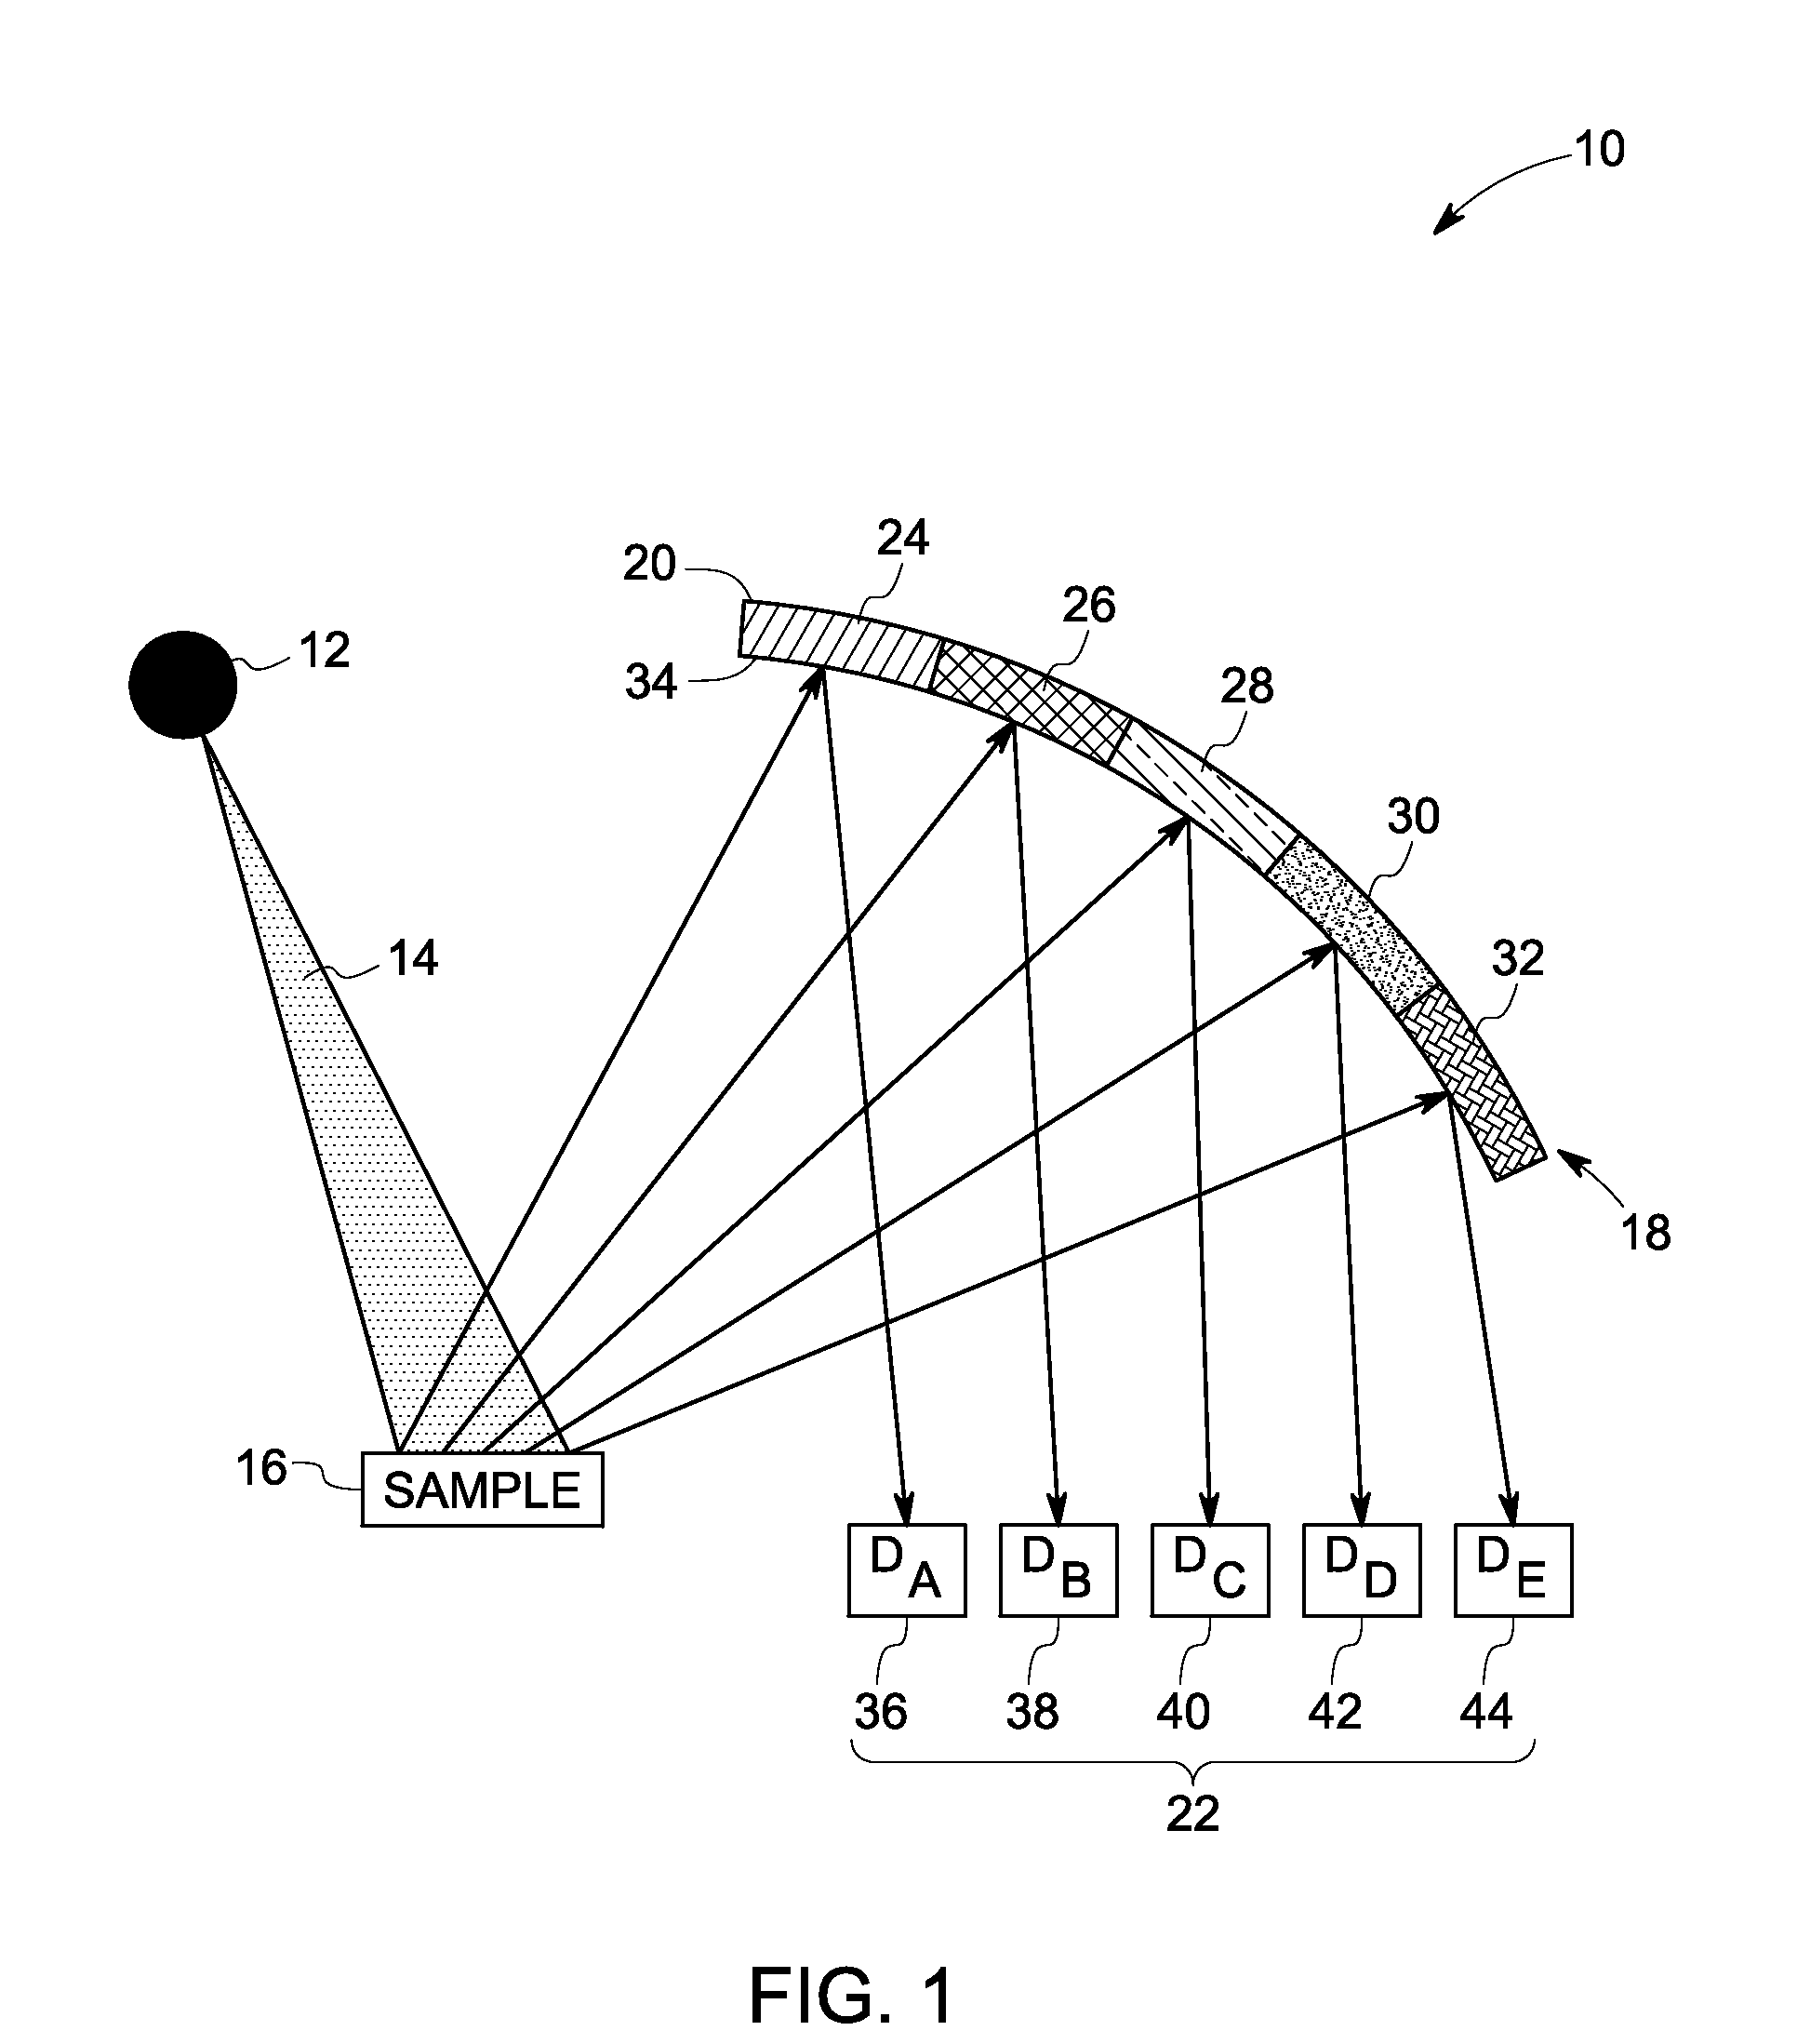 Elemental composition detection system and method